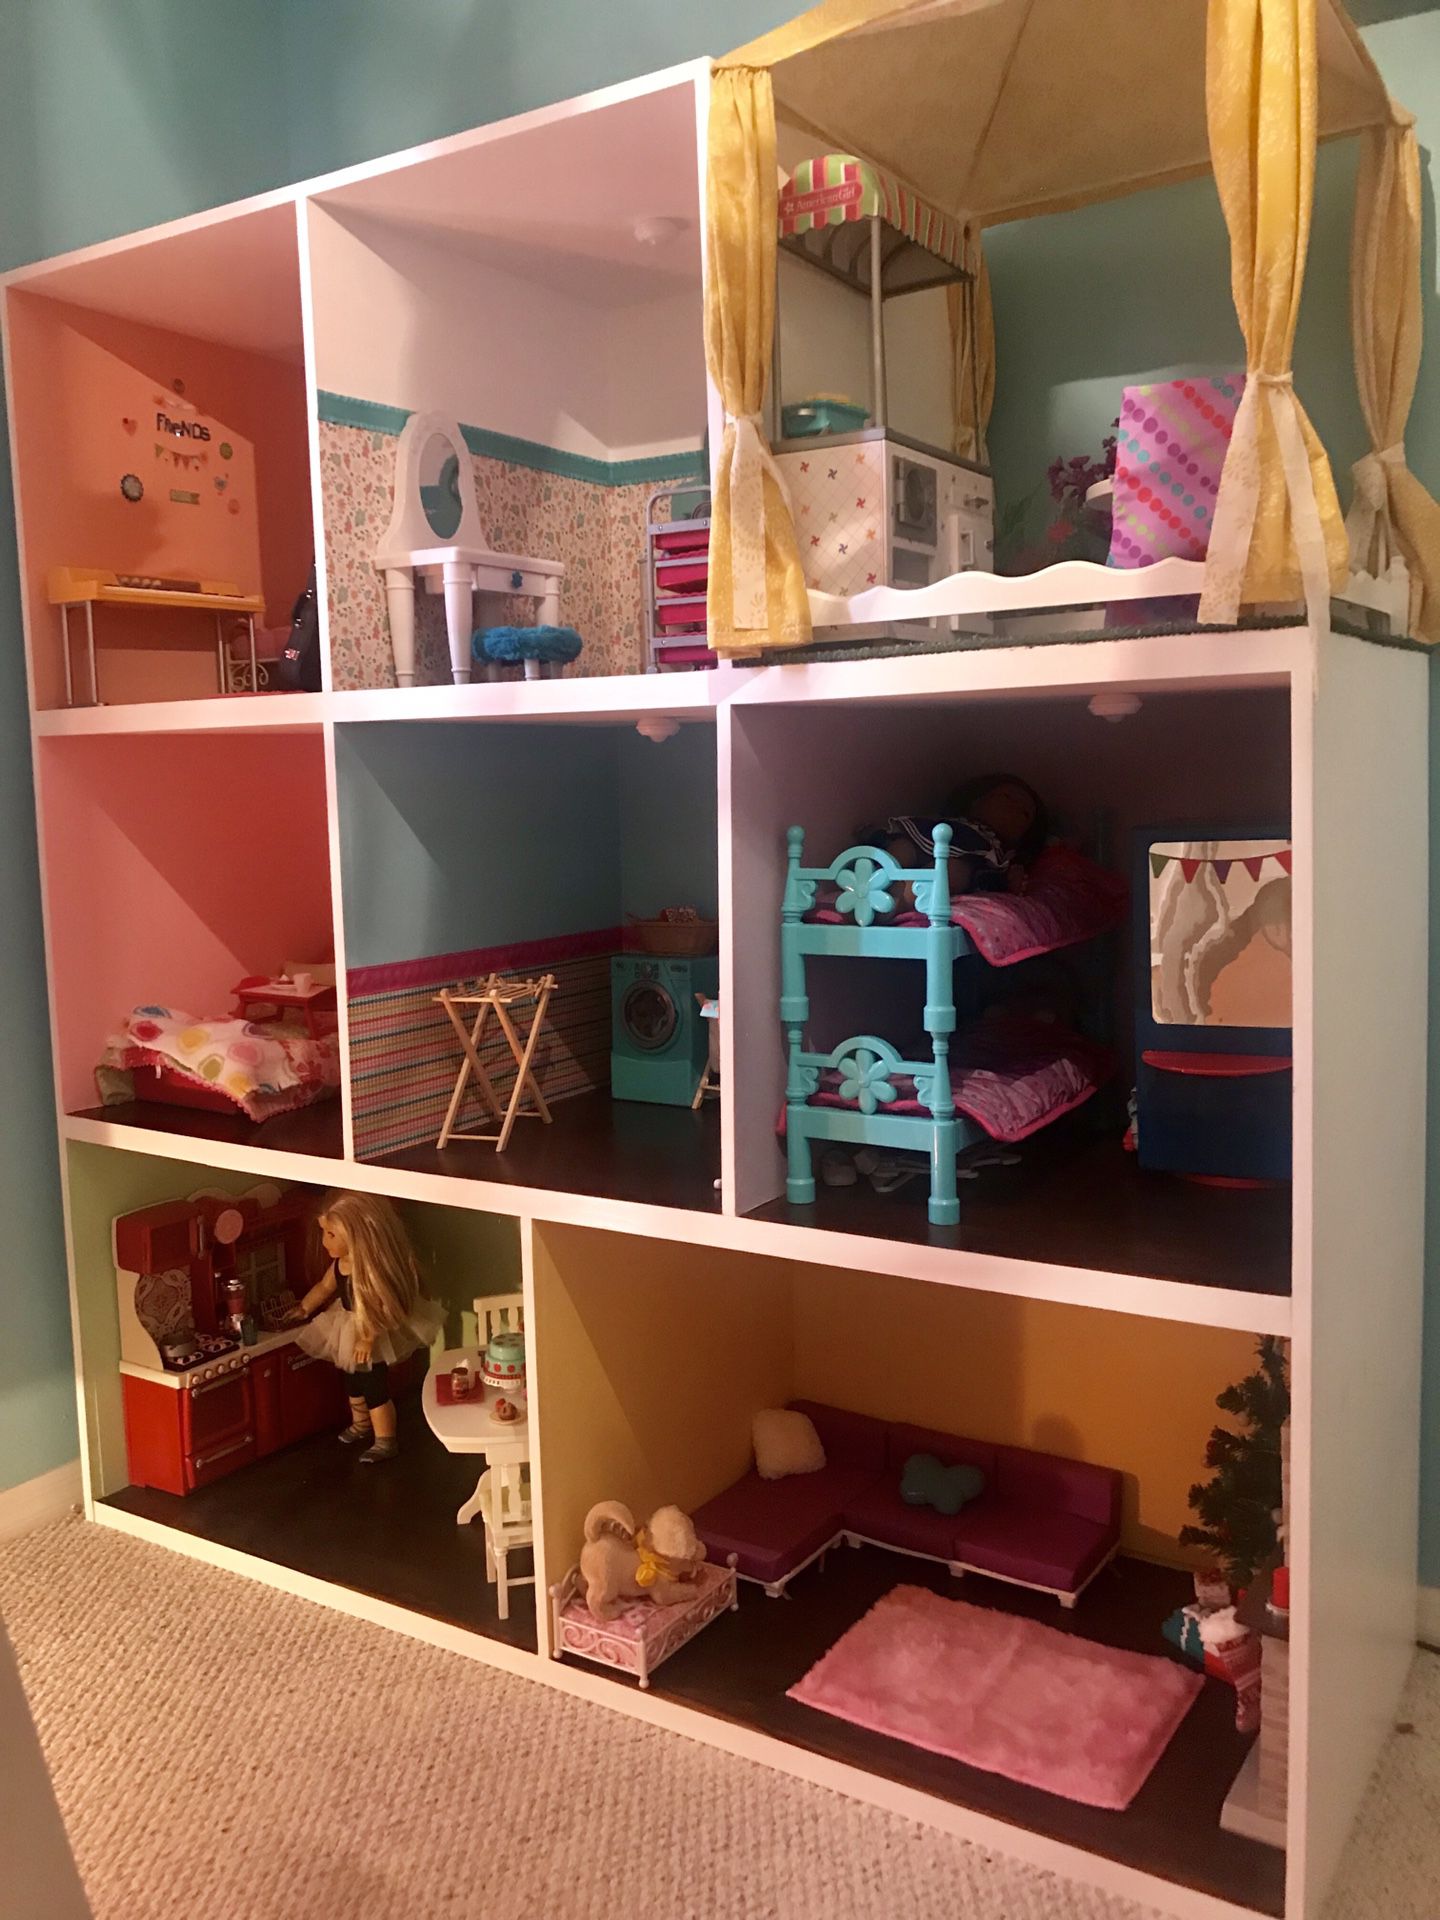 American Girl Dollhouse or Our Generation